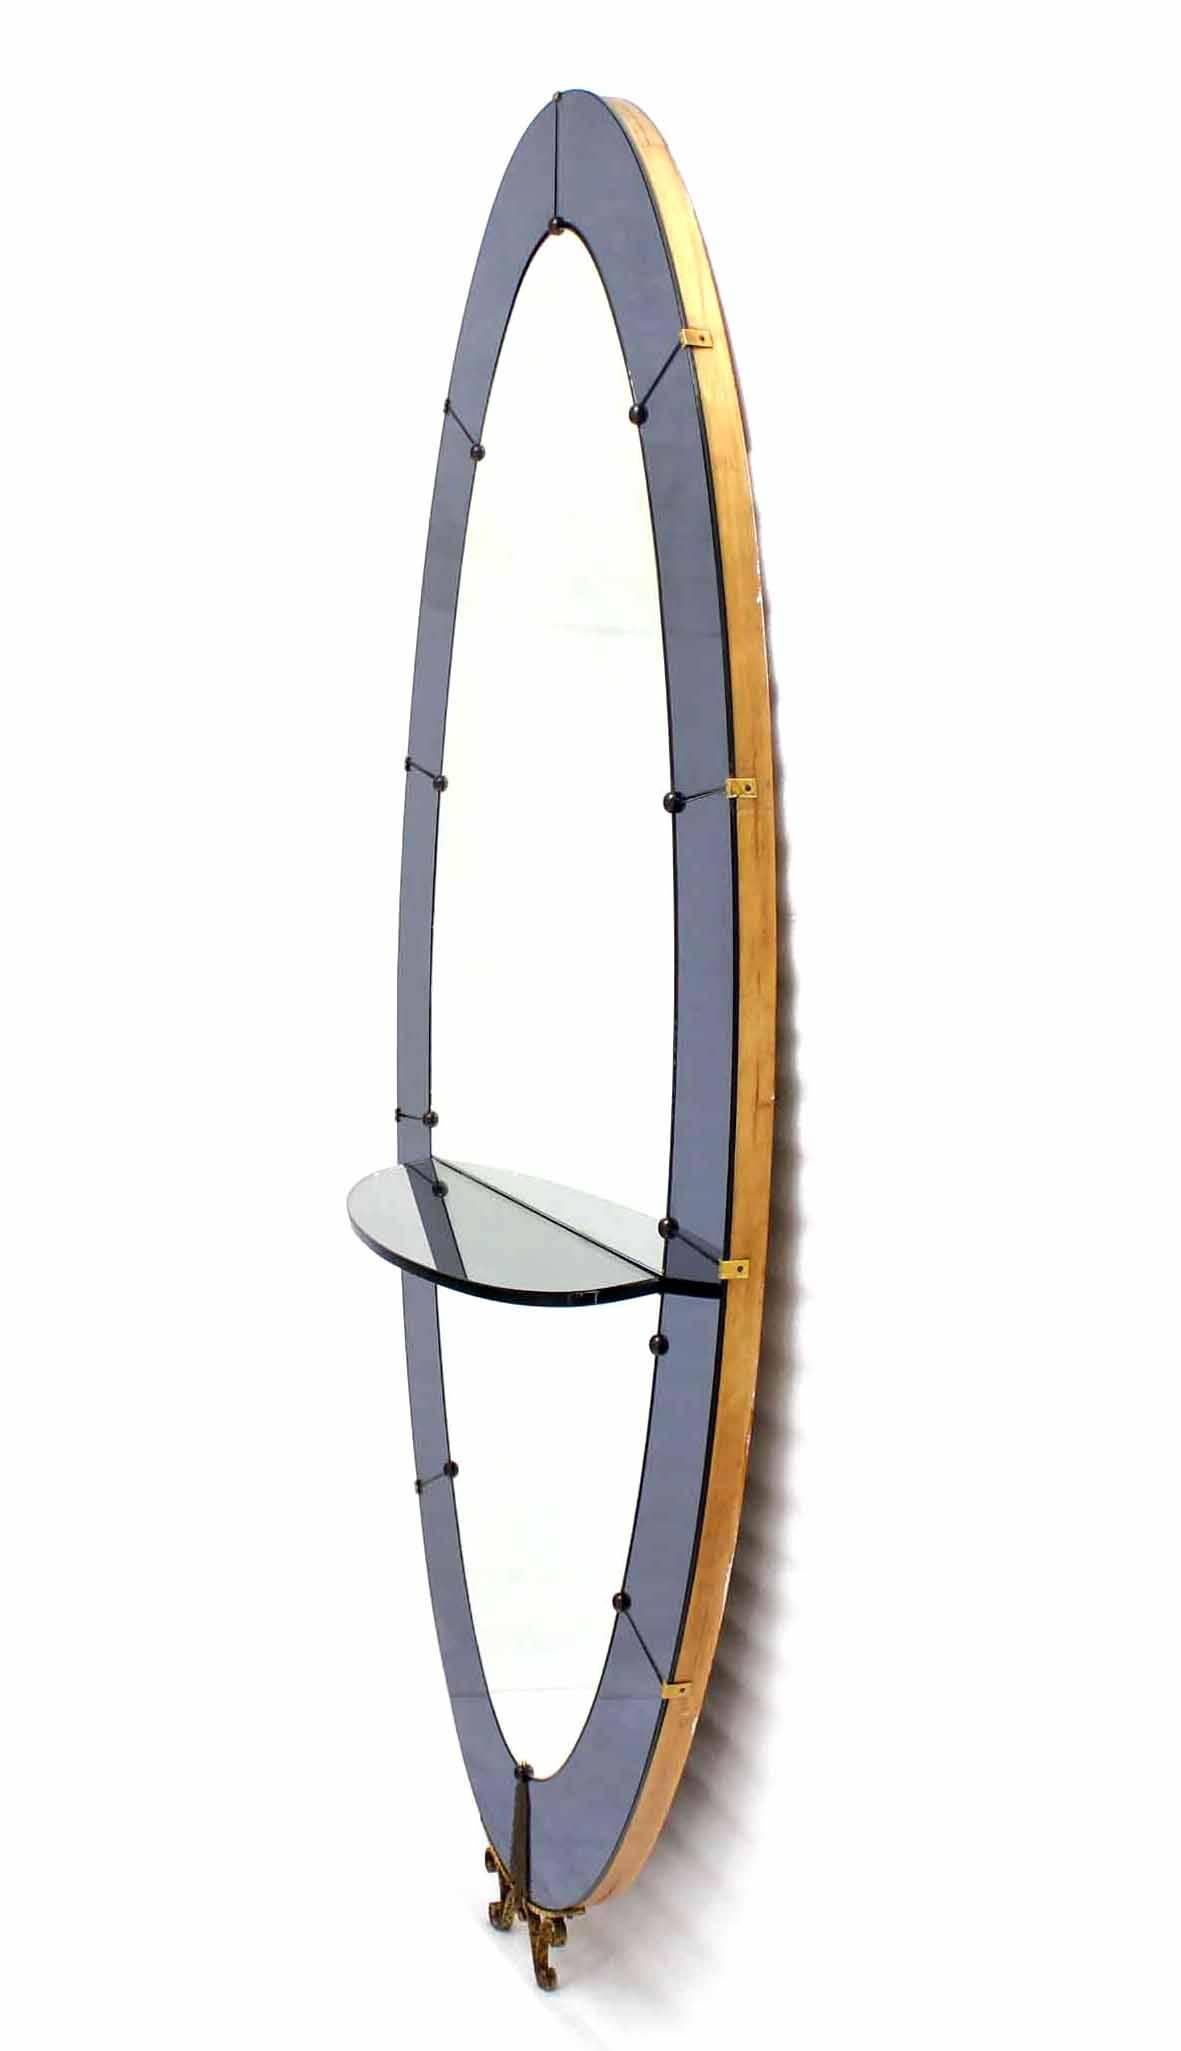 Polished Large Seven Feet Tall Oval Cheval Art Deco Floor Mirror with Shelf Vanity